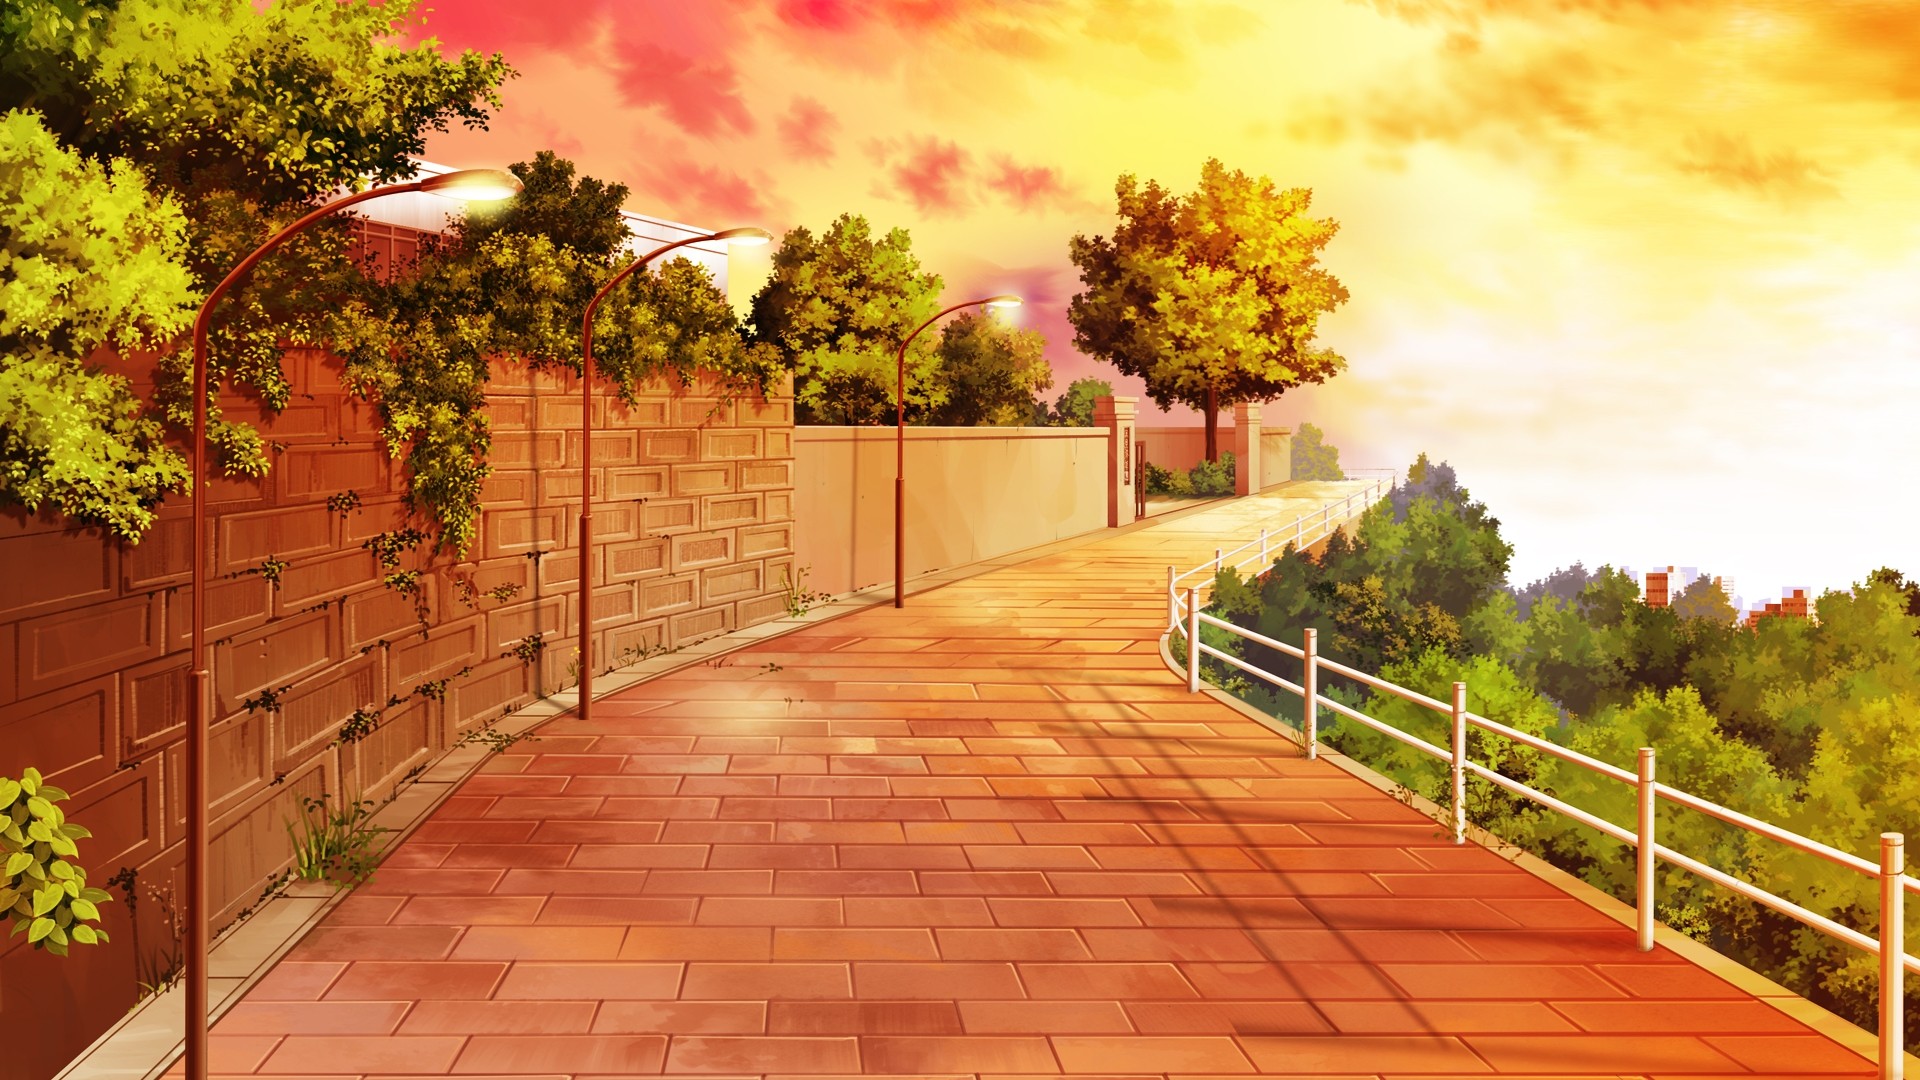 Cute Anime Scenery Wallpapers